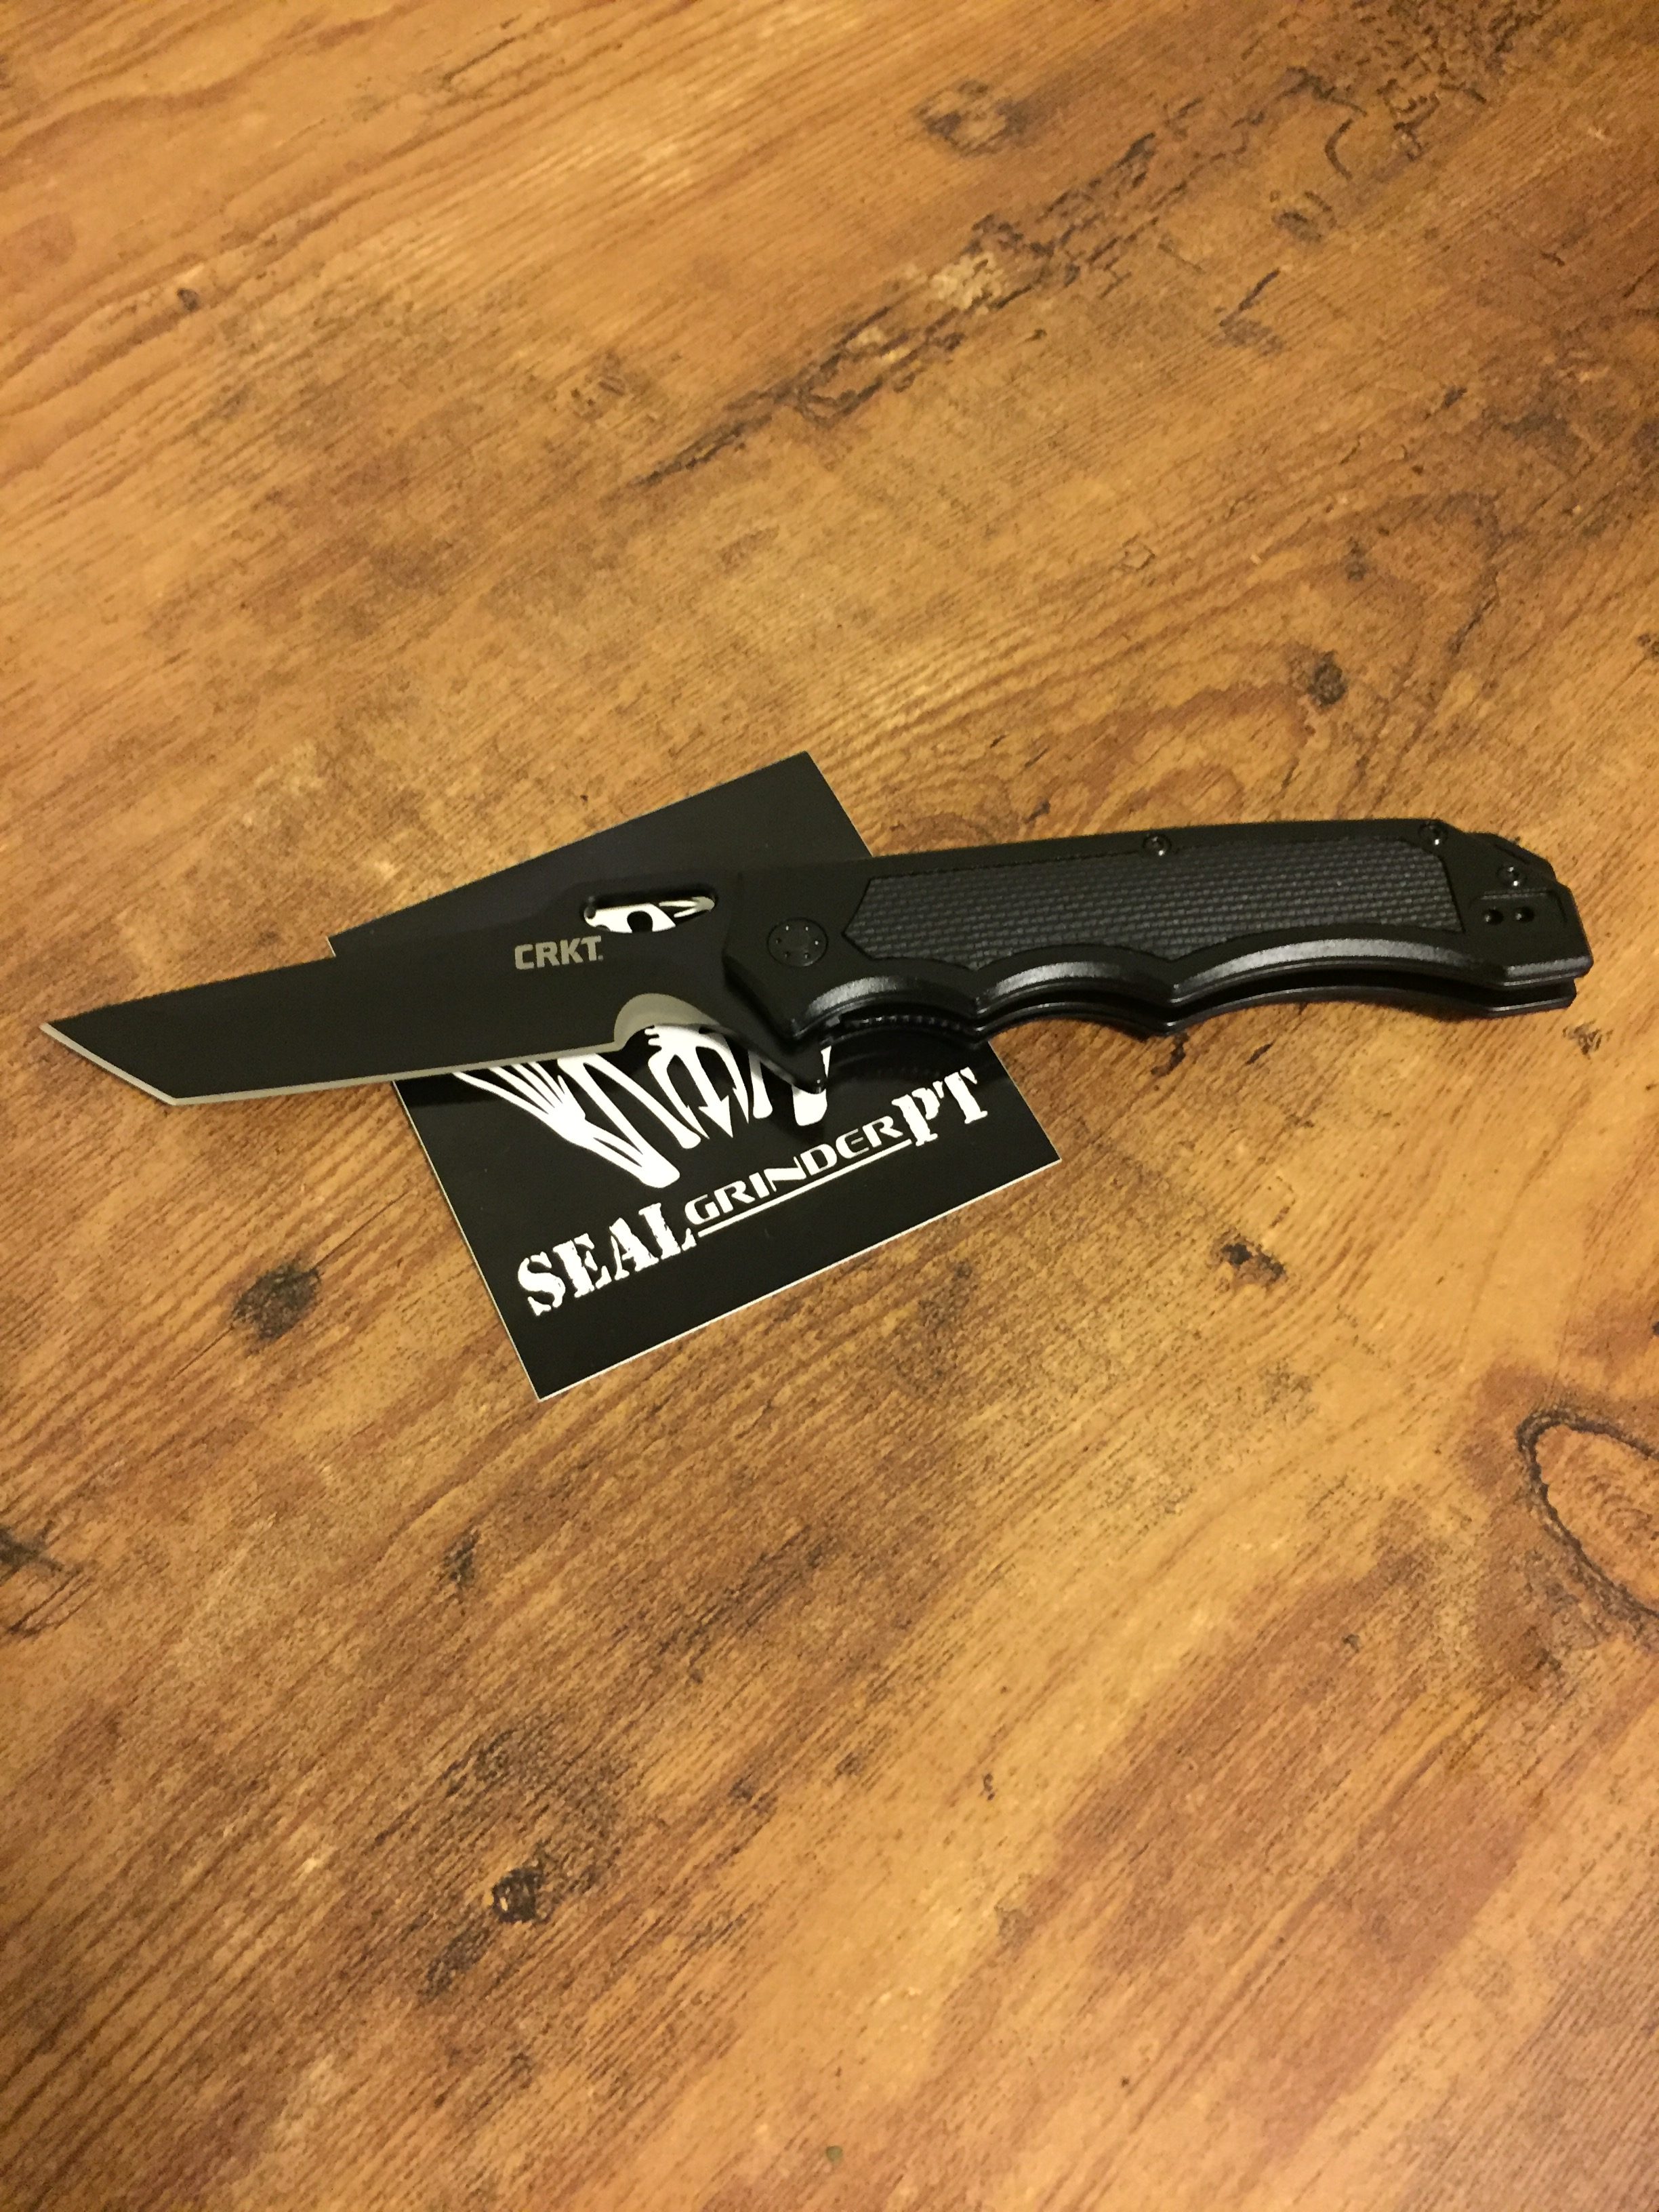 Featured image for “Gear Review: CRKT Septimo Folding Knife”